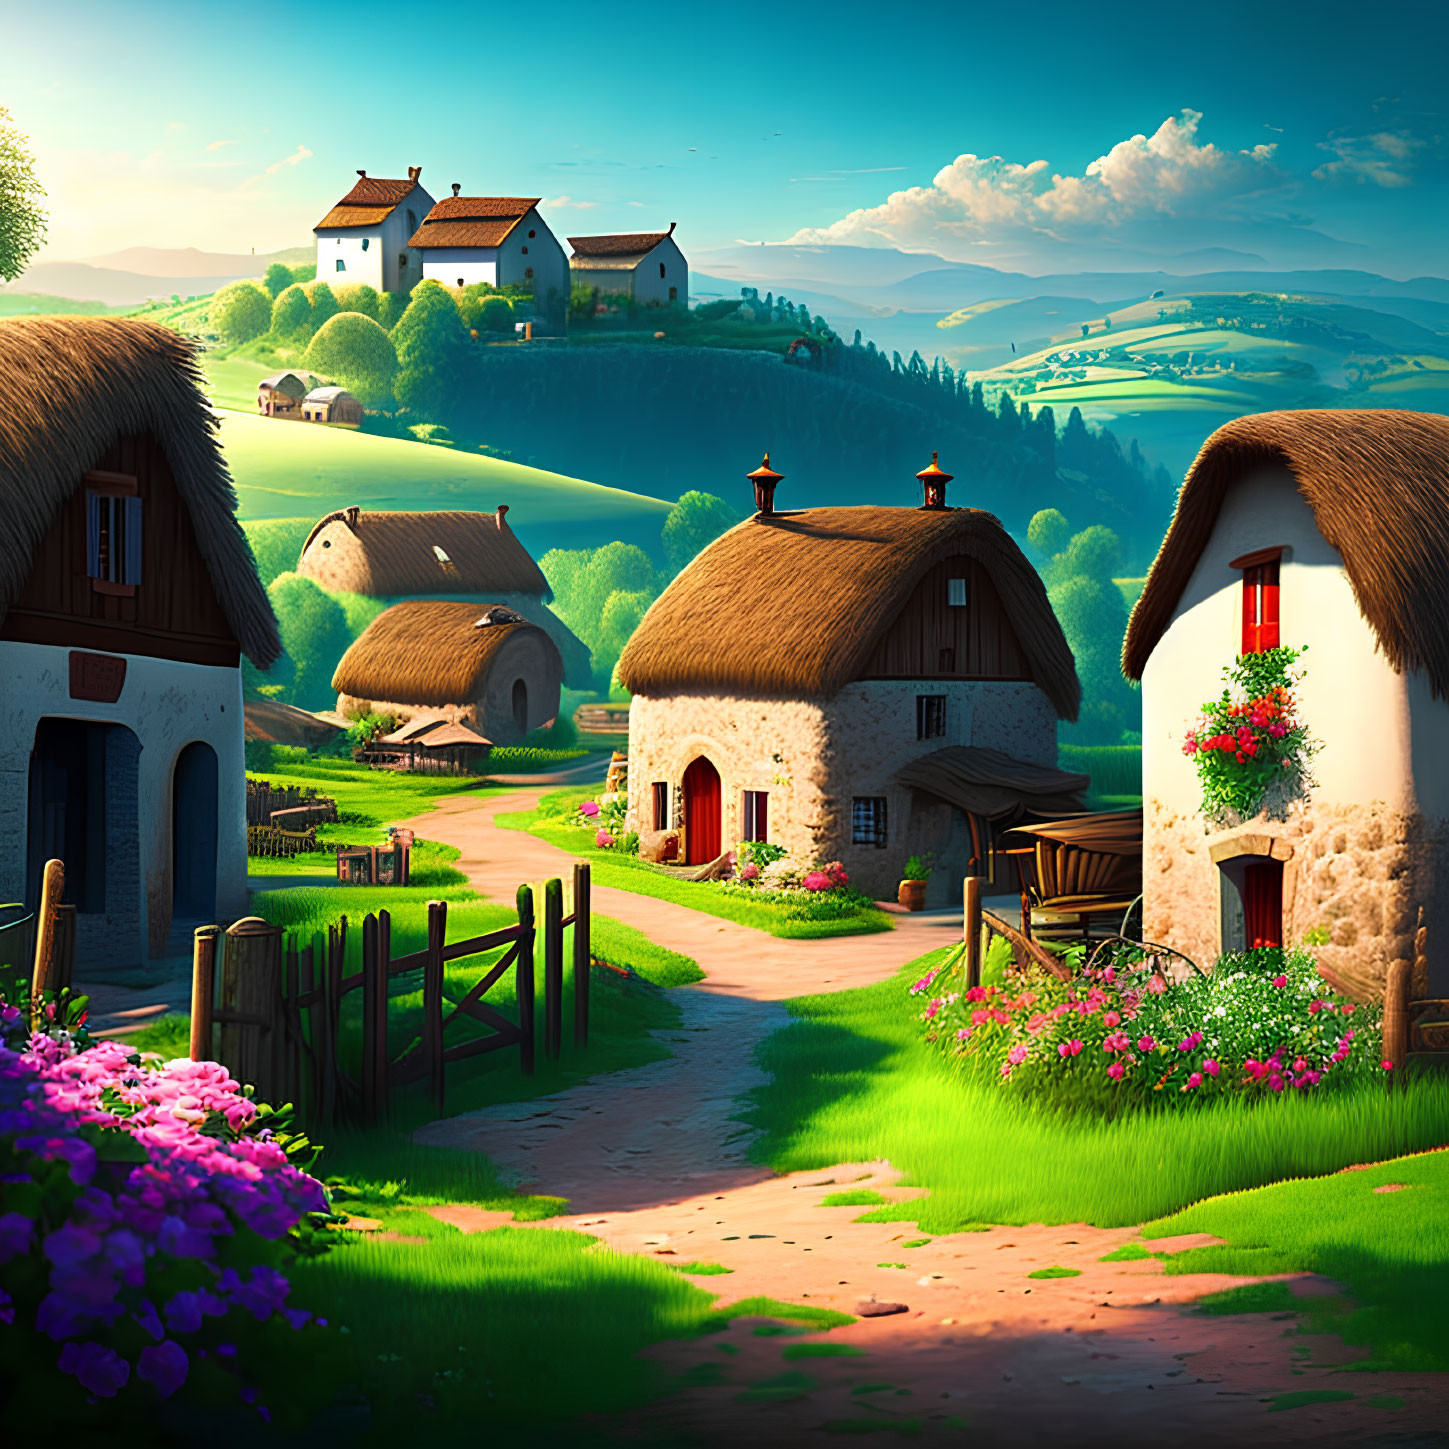 Tranquil rural scene with thatched cottages, blooming flowers, winding path, and distant